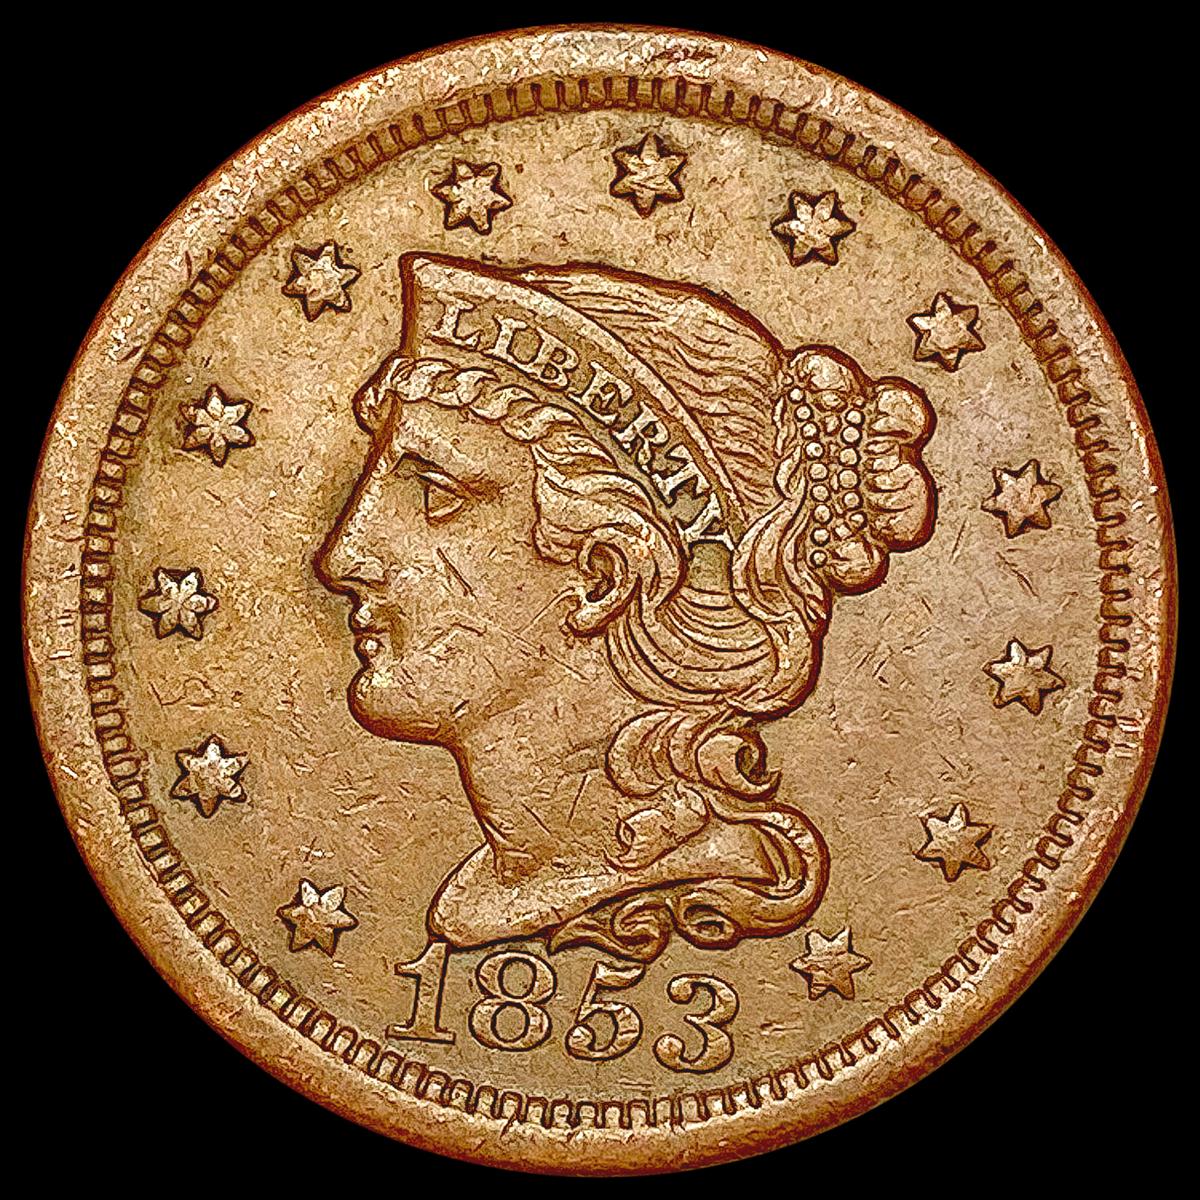 1853 Braided Hair Large Cent CLOSELY UNCIRCULATED